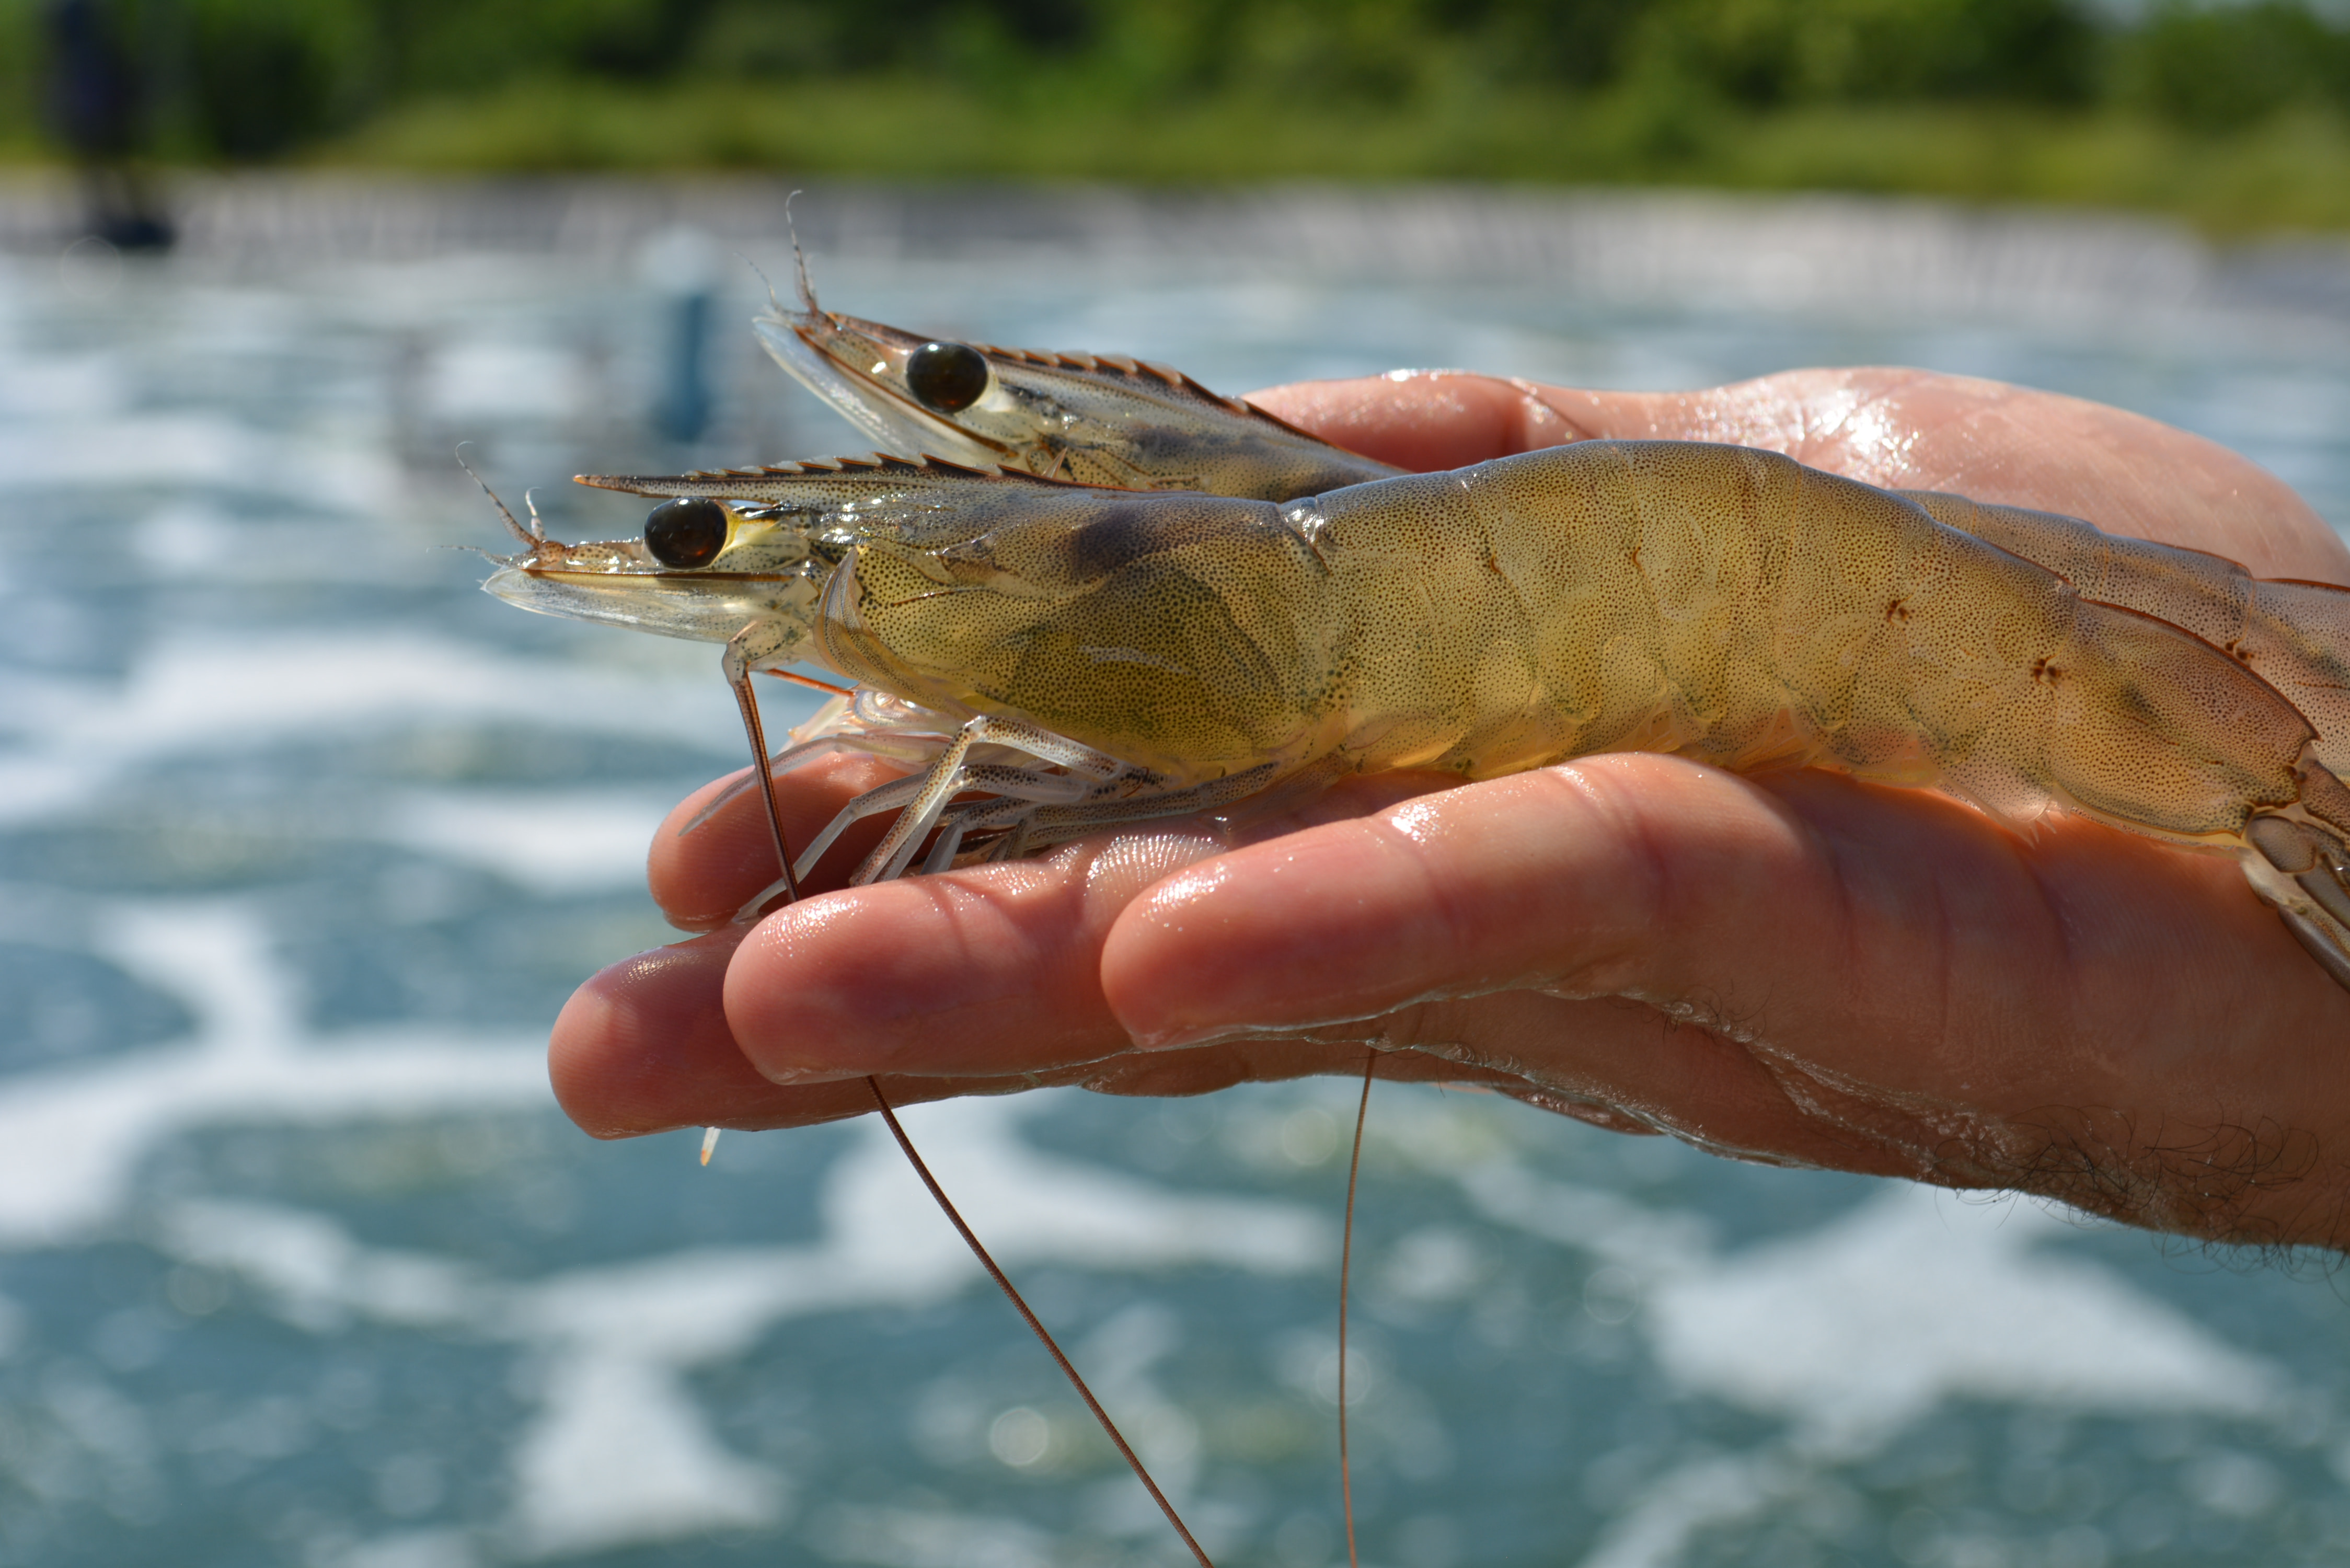 The World's Freshest and Most Sustainable Shrimp Produced from an Atarraya Shrimpbox Farm and Distributed via Agua Blanca to Restaurants and Chefs